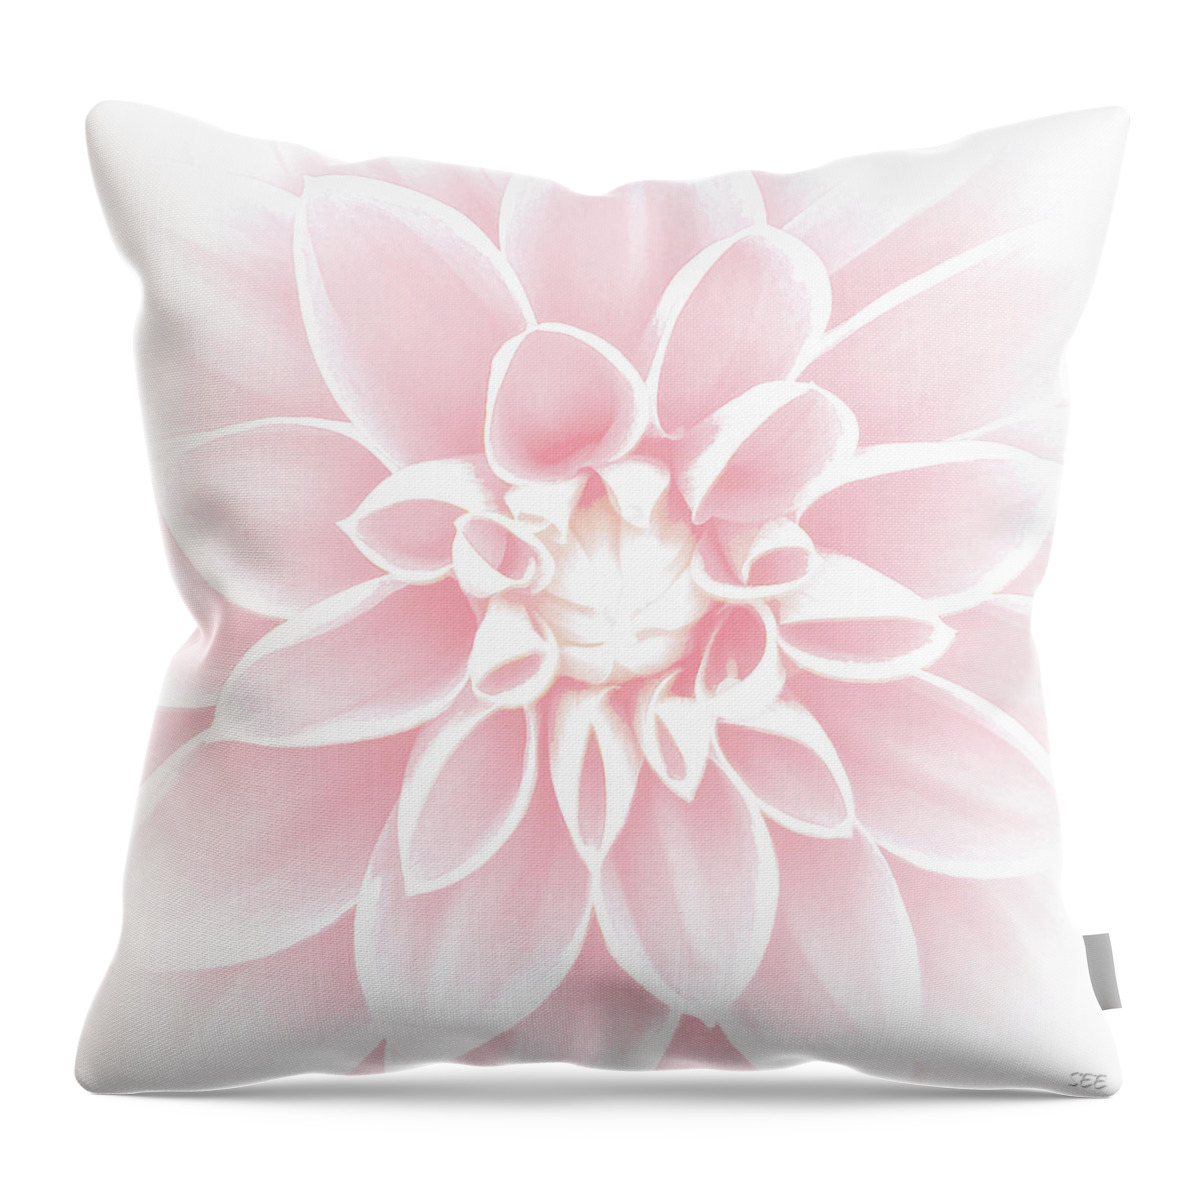 Flowers Throw Pillow featuring the photograph Pink Dahlia by Susan Eileen Evans